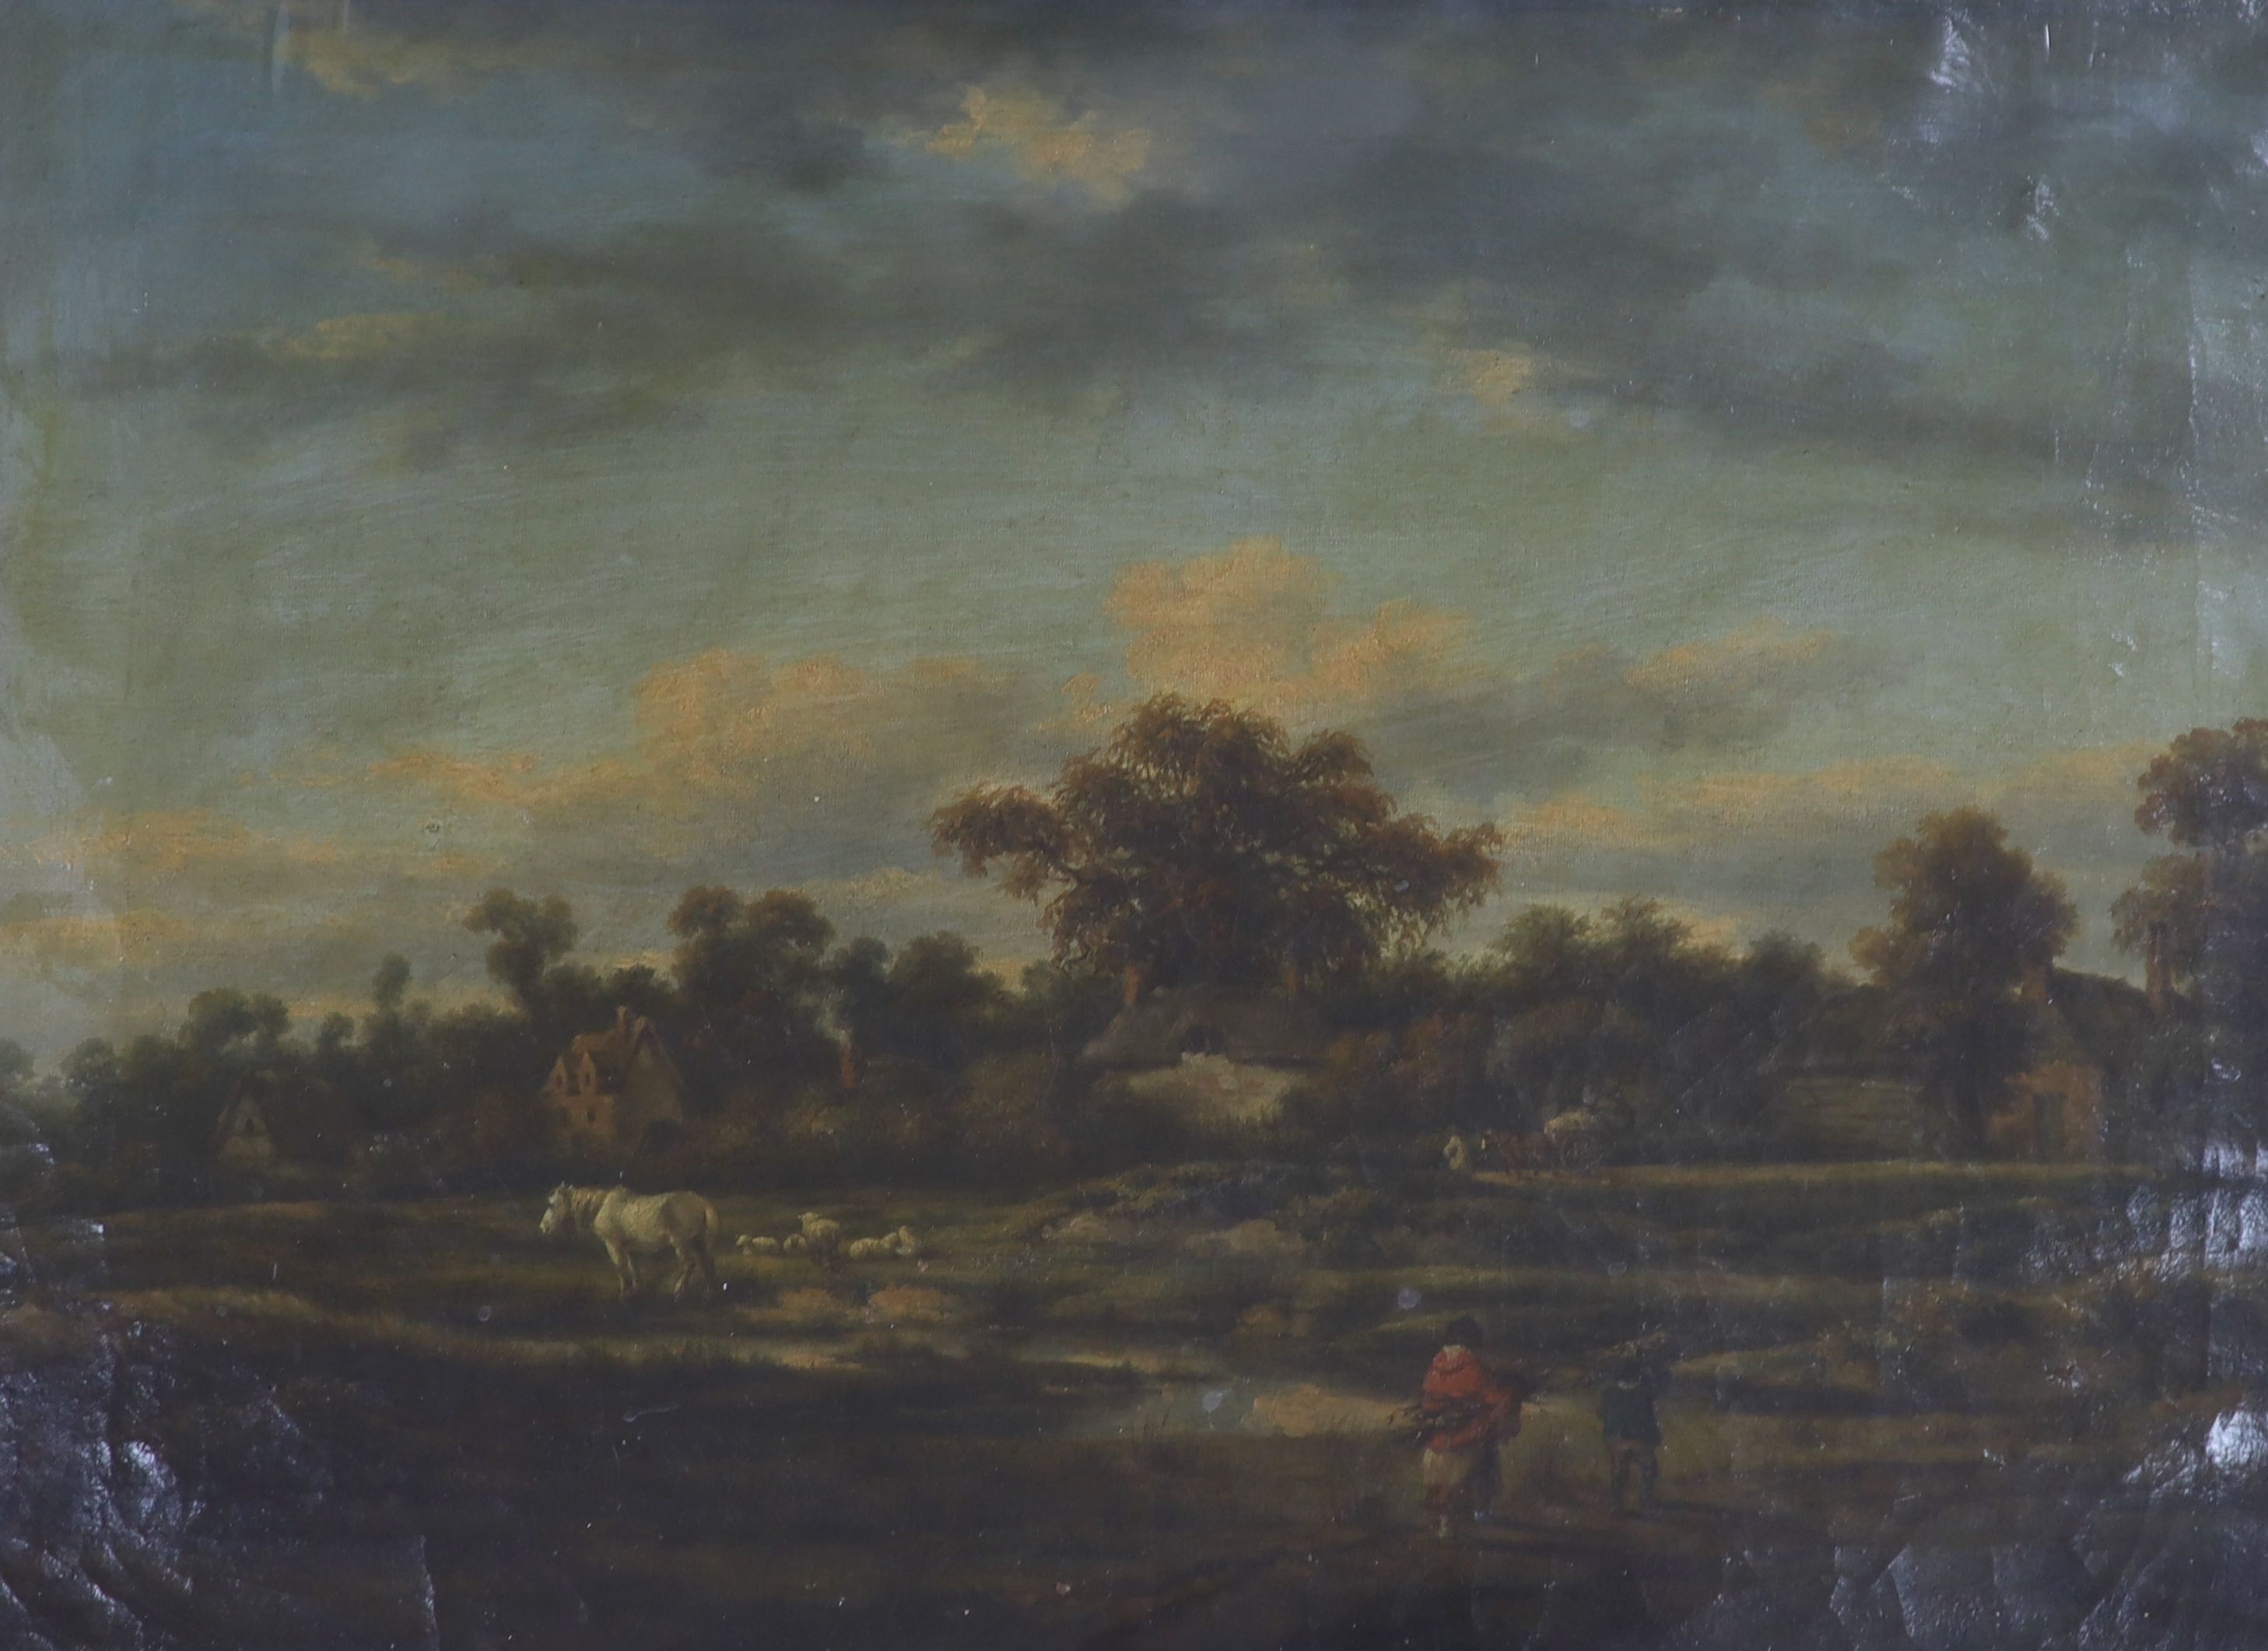 19th century Flemish School, oil on canvas, faggot gatherers and sheep in a landscape, indistinctly signed, 36 x 50 cm.